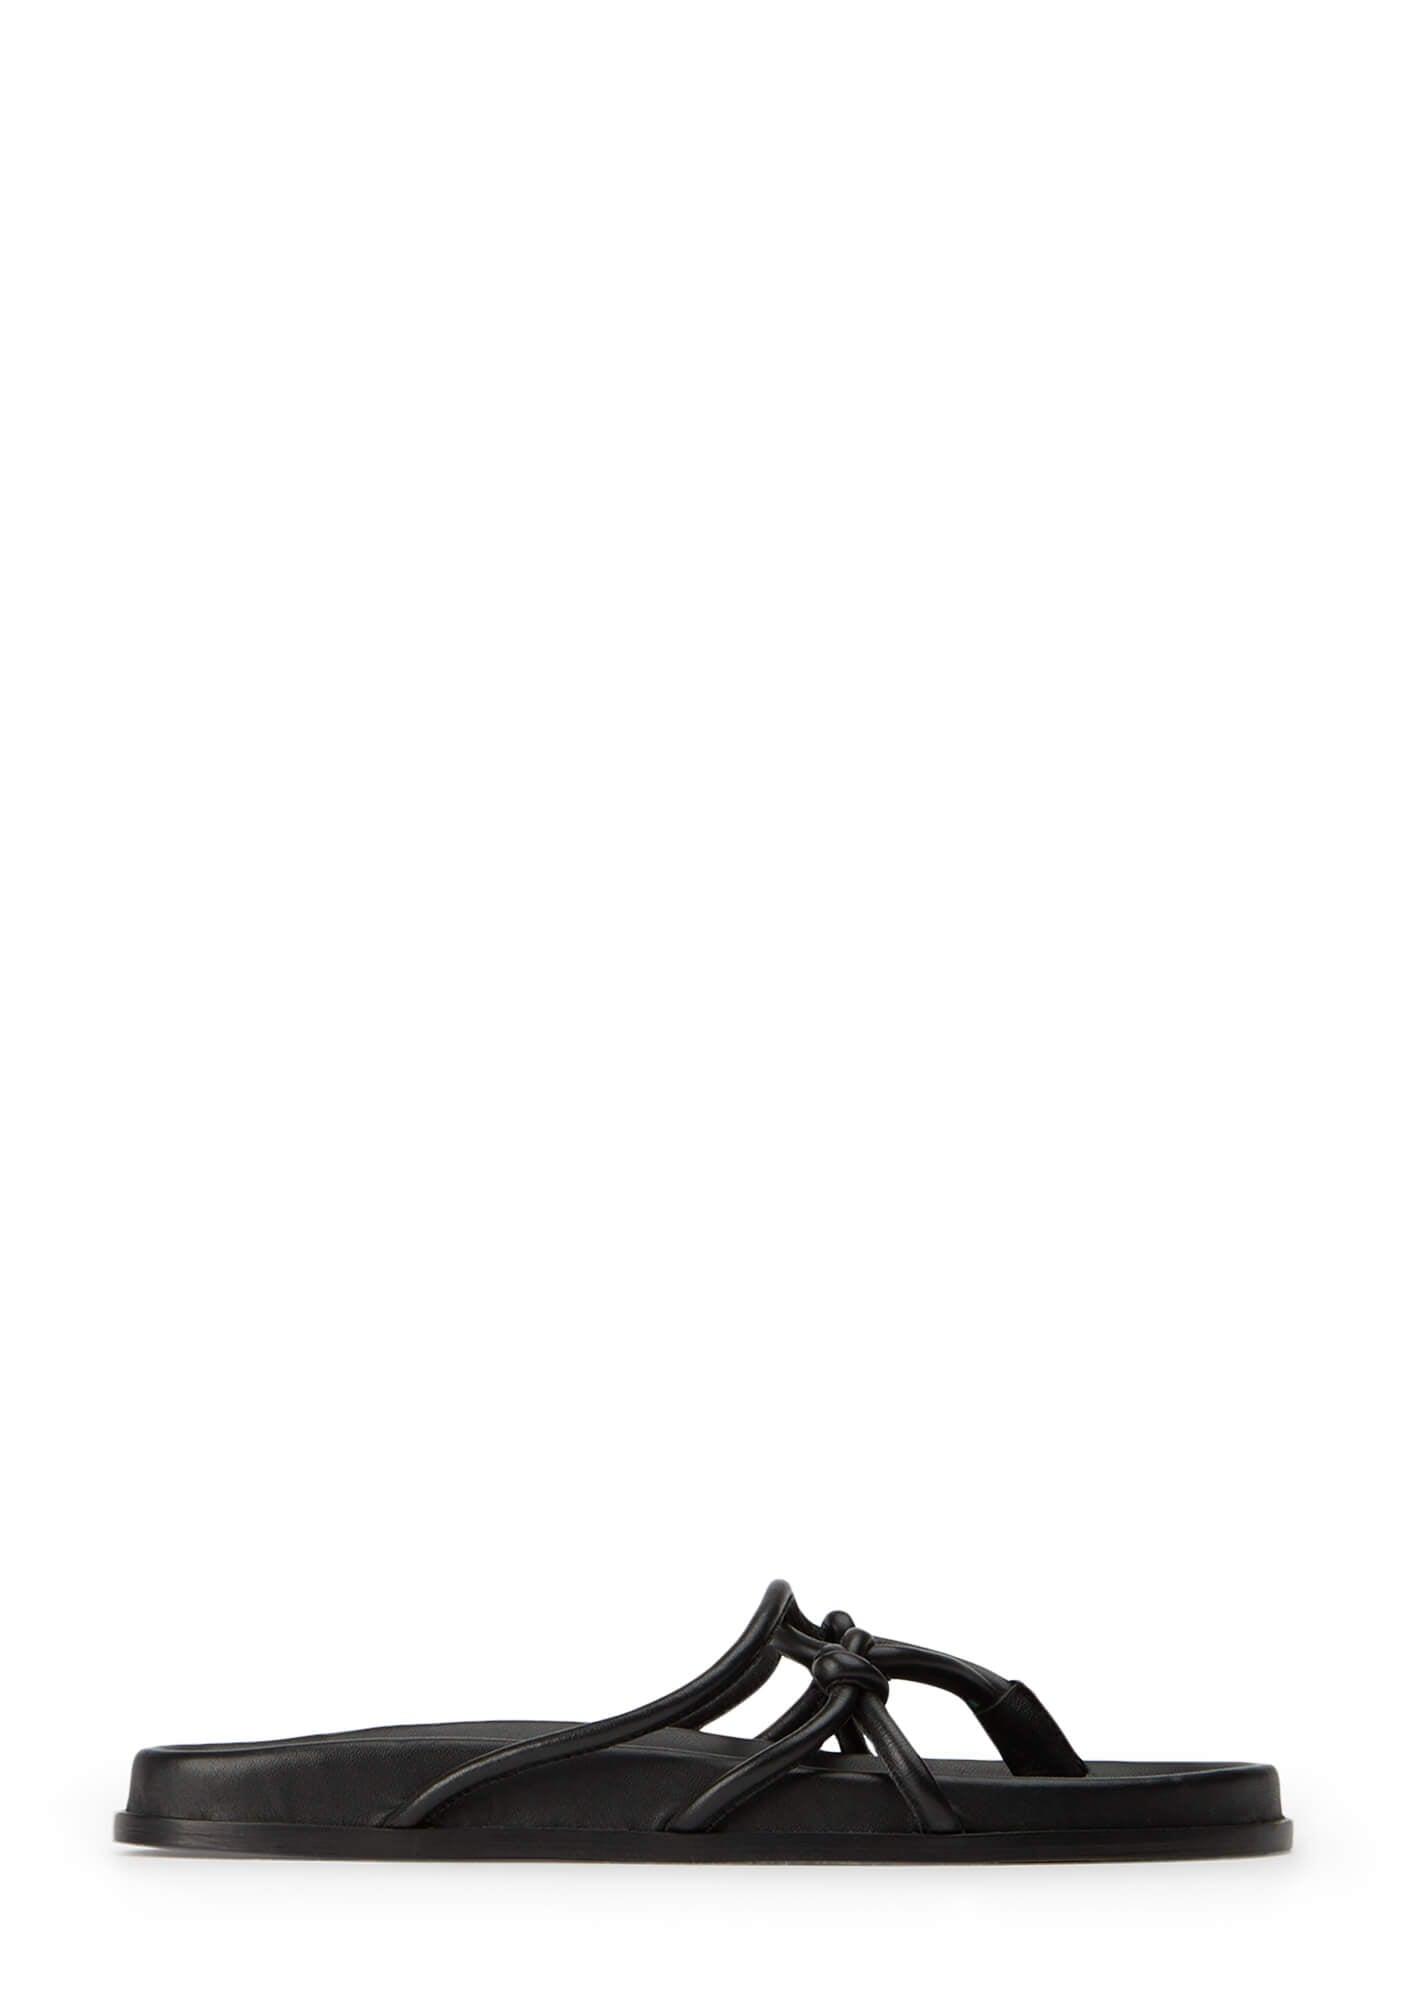 Tony Bianco Luelle Sandals in Black | Lyst